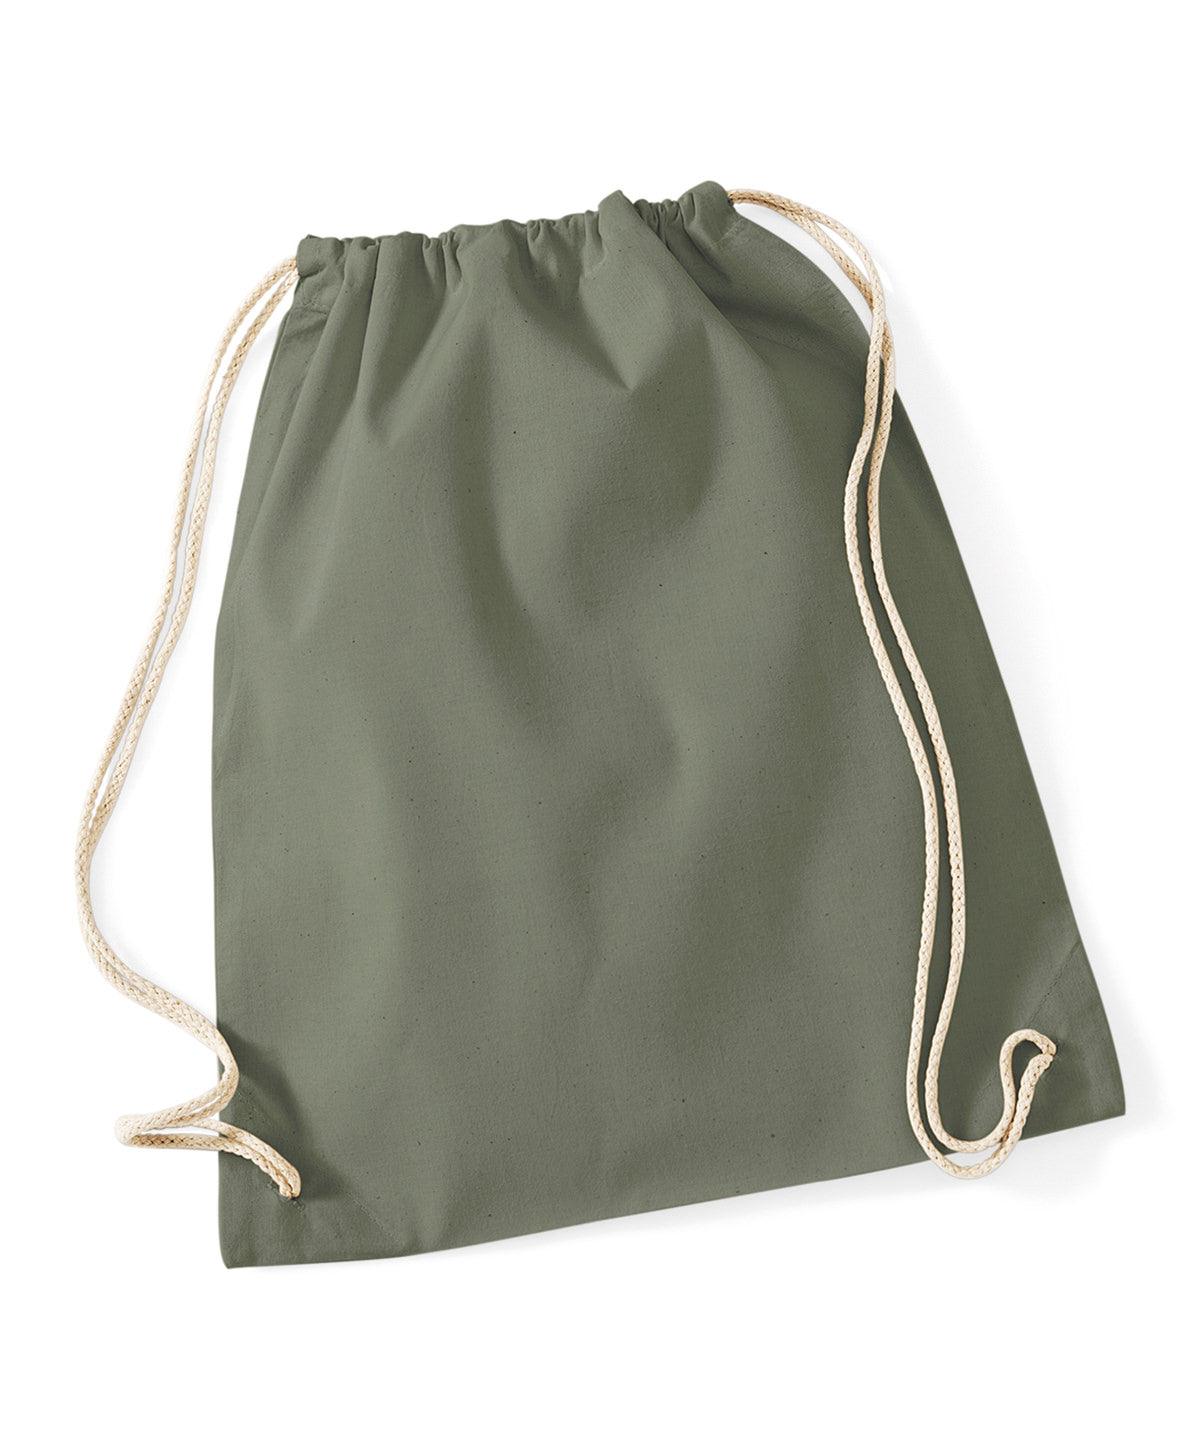 Olive Green - Cotton gymsac Bags Westford Mill Bags & Luggage, Junior, Must Haves, Pastels and Tie Dye Schoolwear Centres